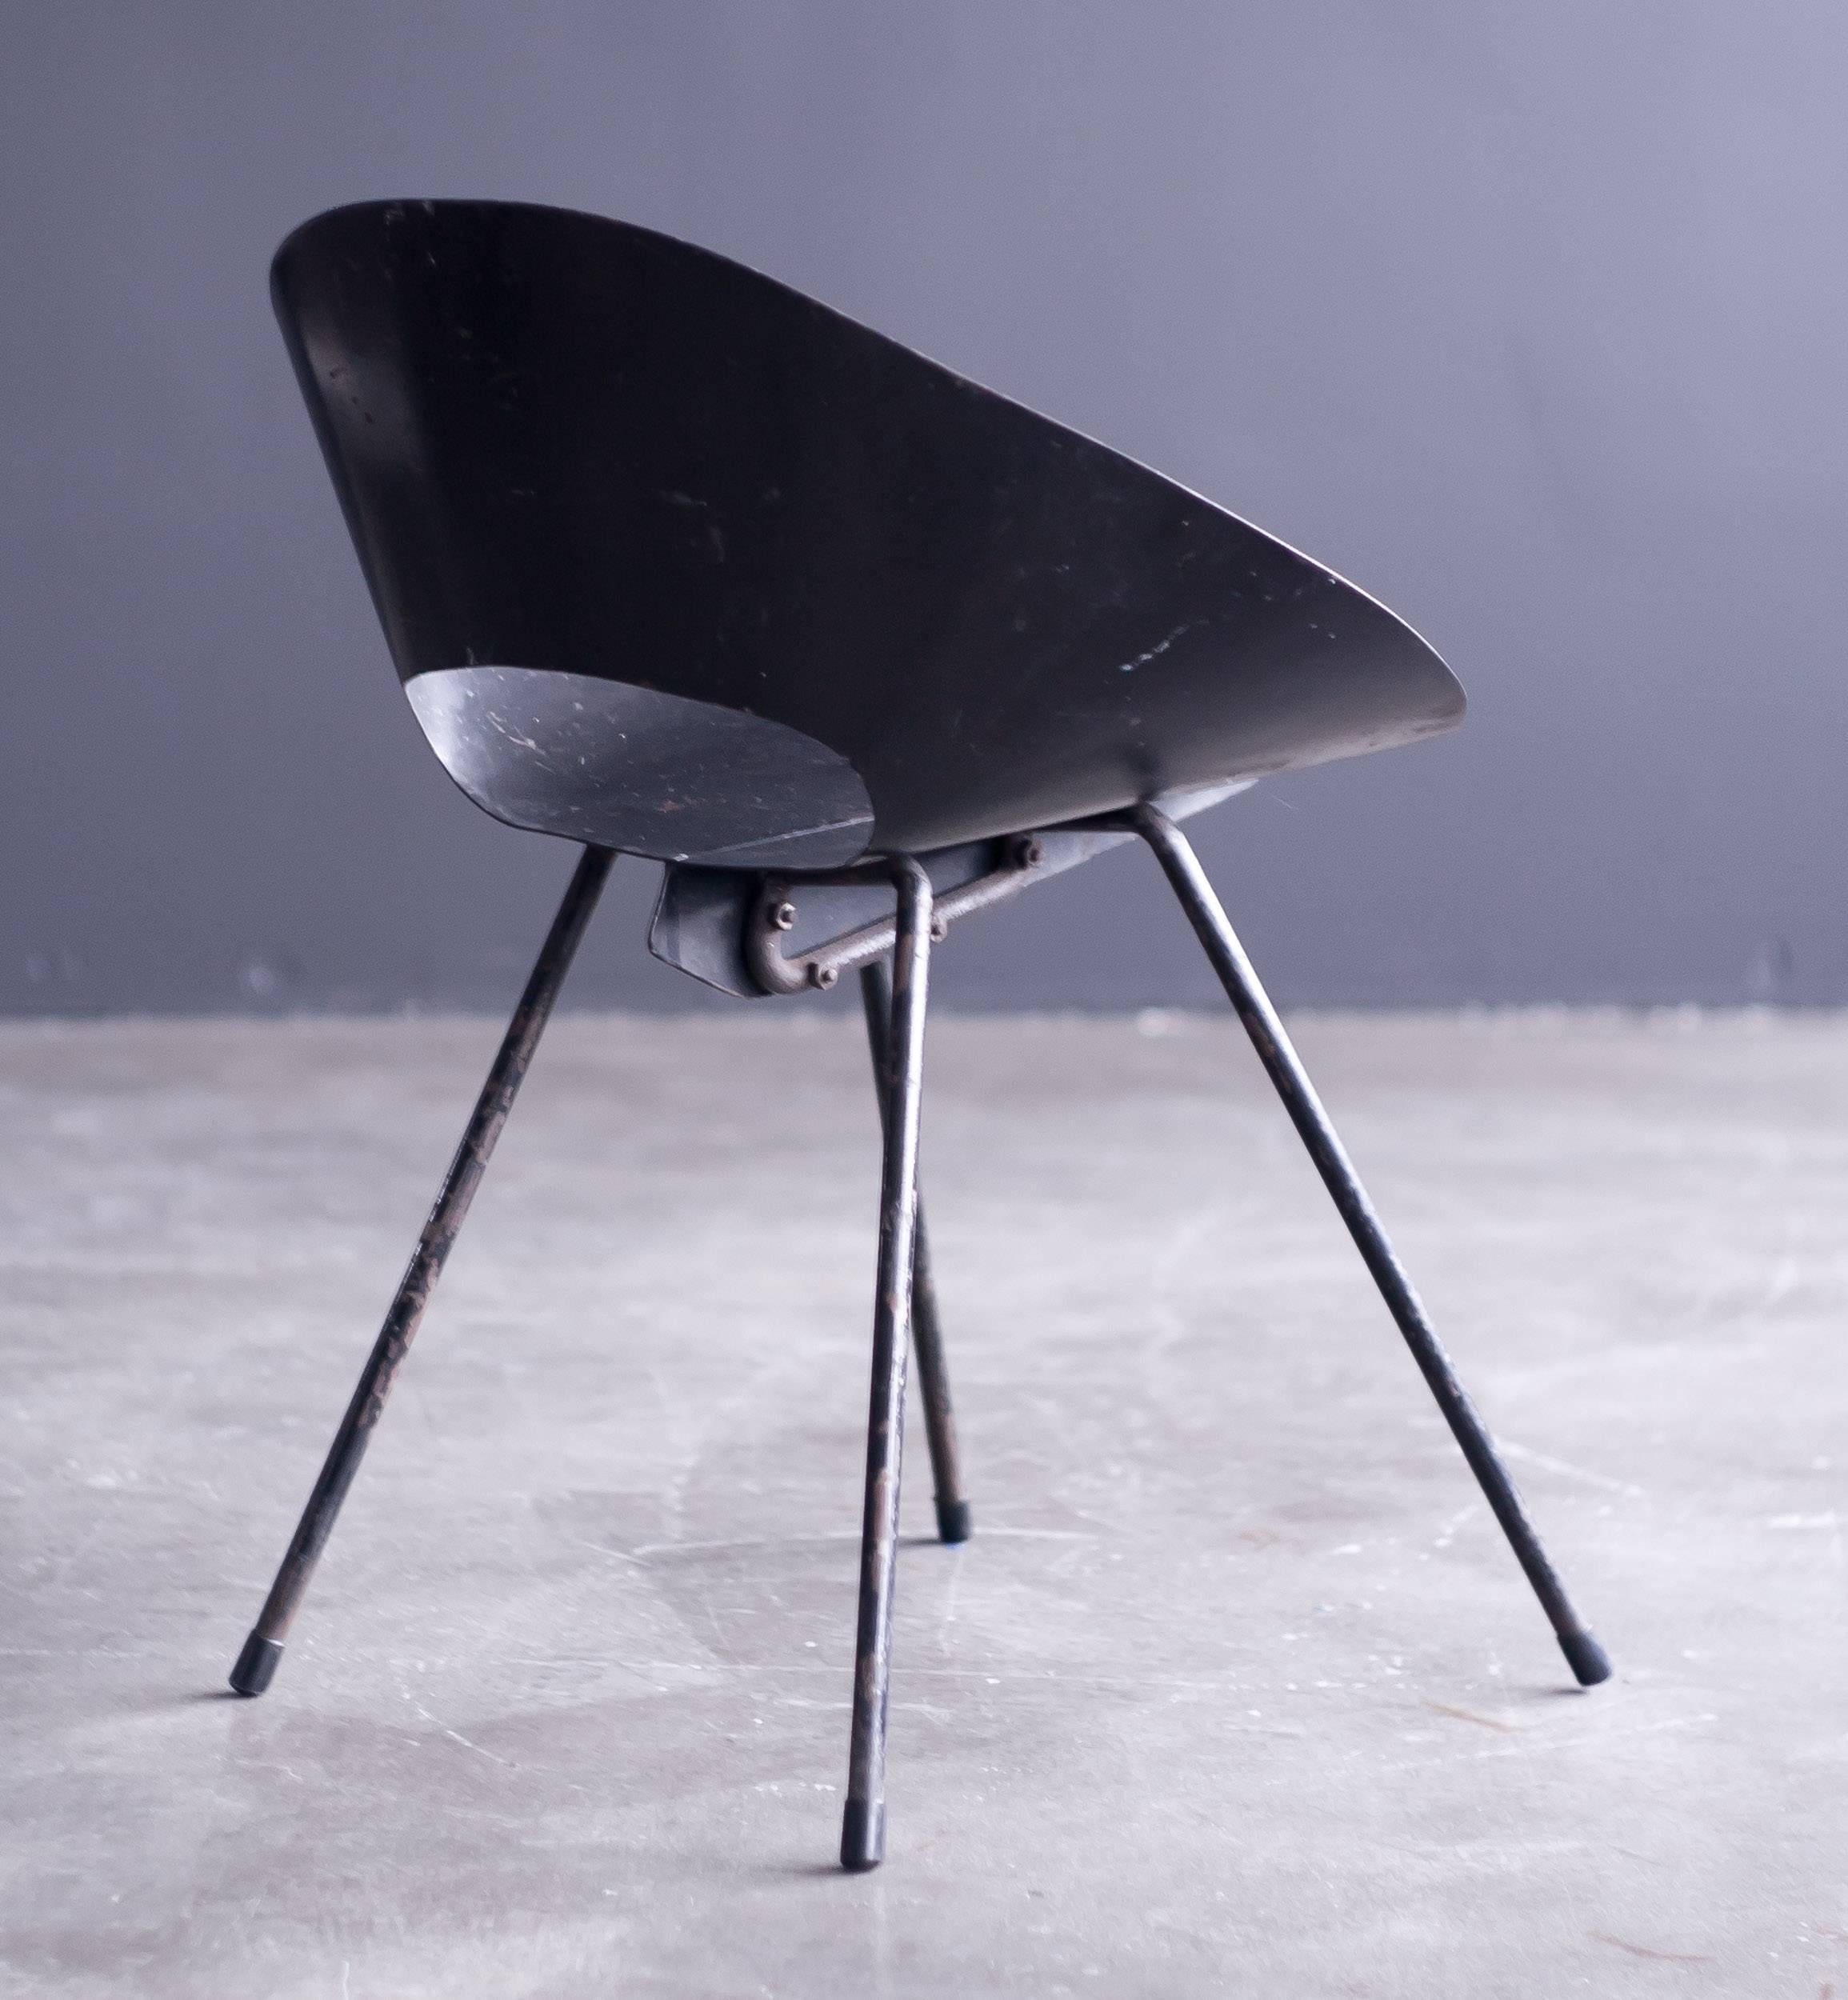 Mid-Century Modern Model #132 Chair Designed in 1948 by Donald Knorr for Knoll